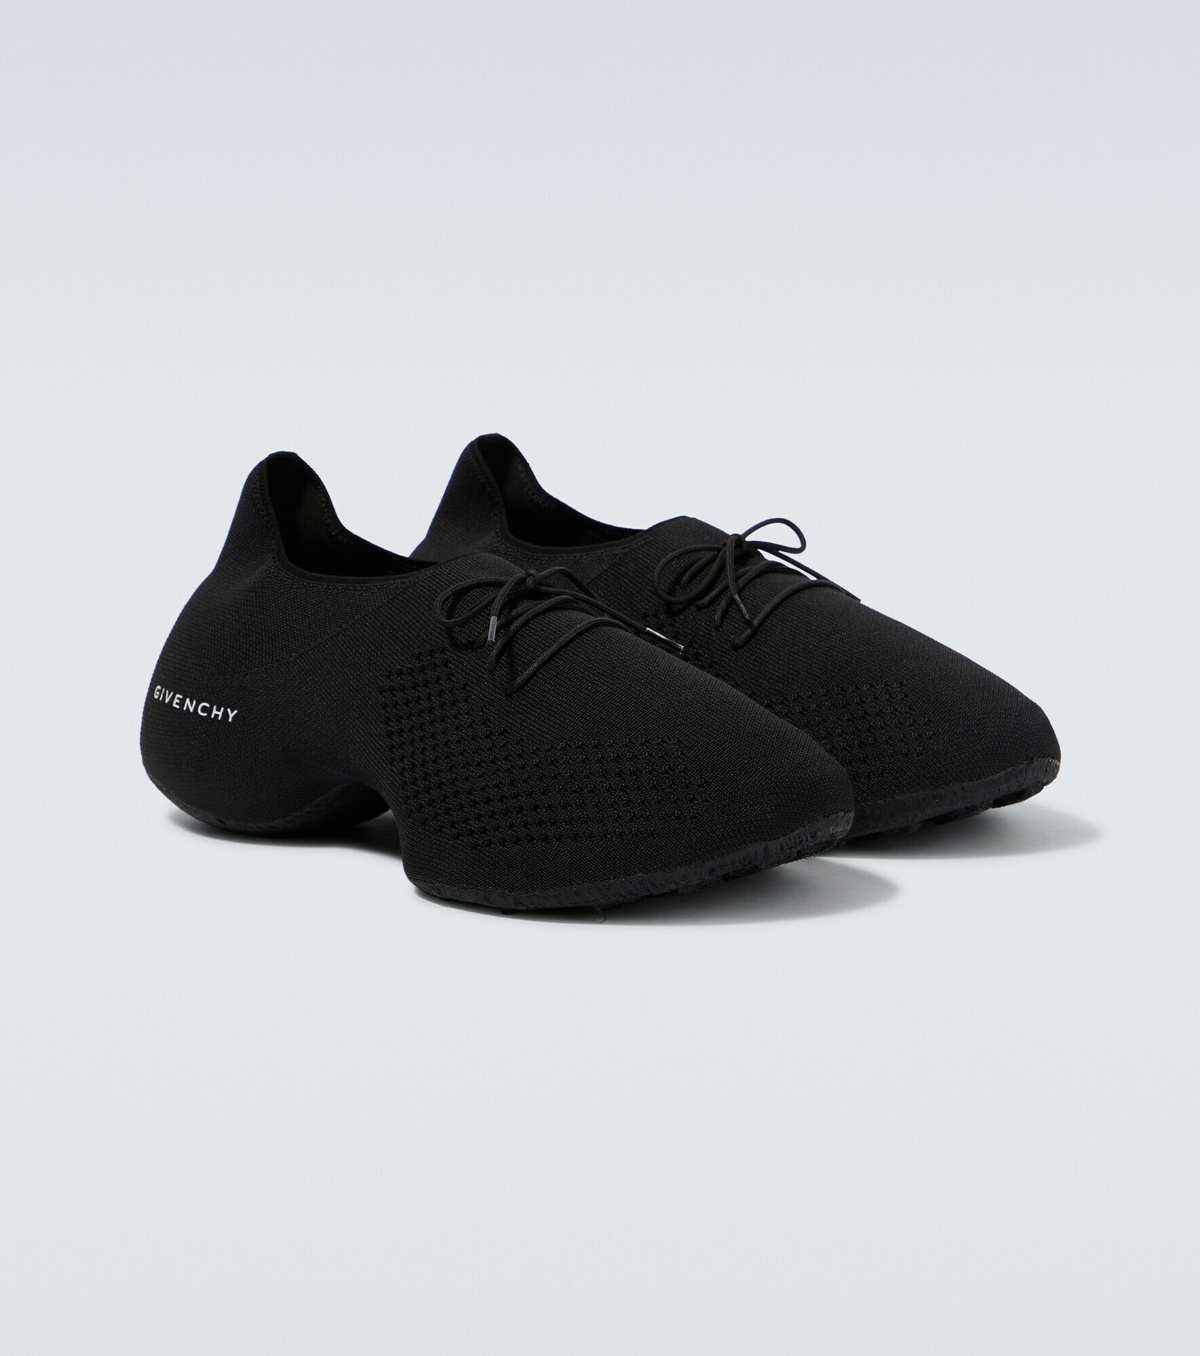 Givenchy - TK-360 knit sneakers Givenchy